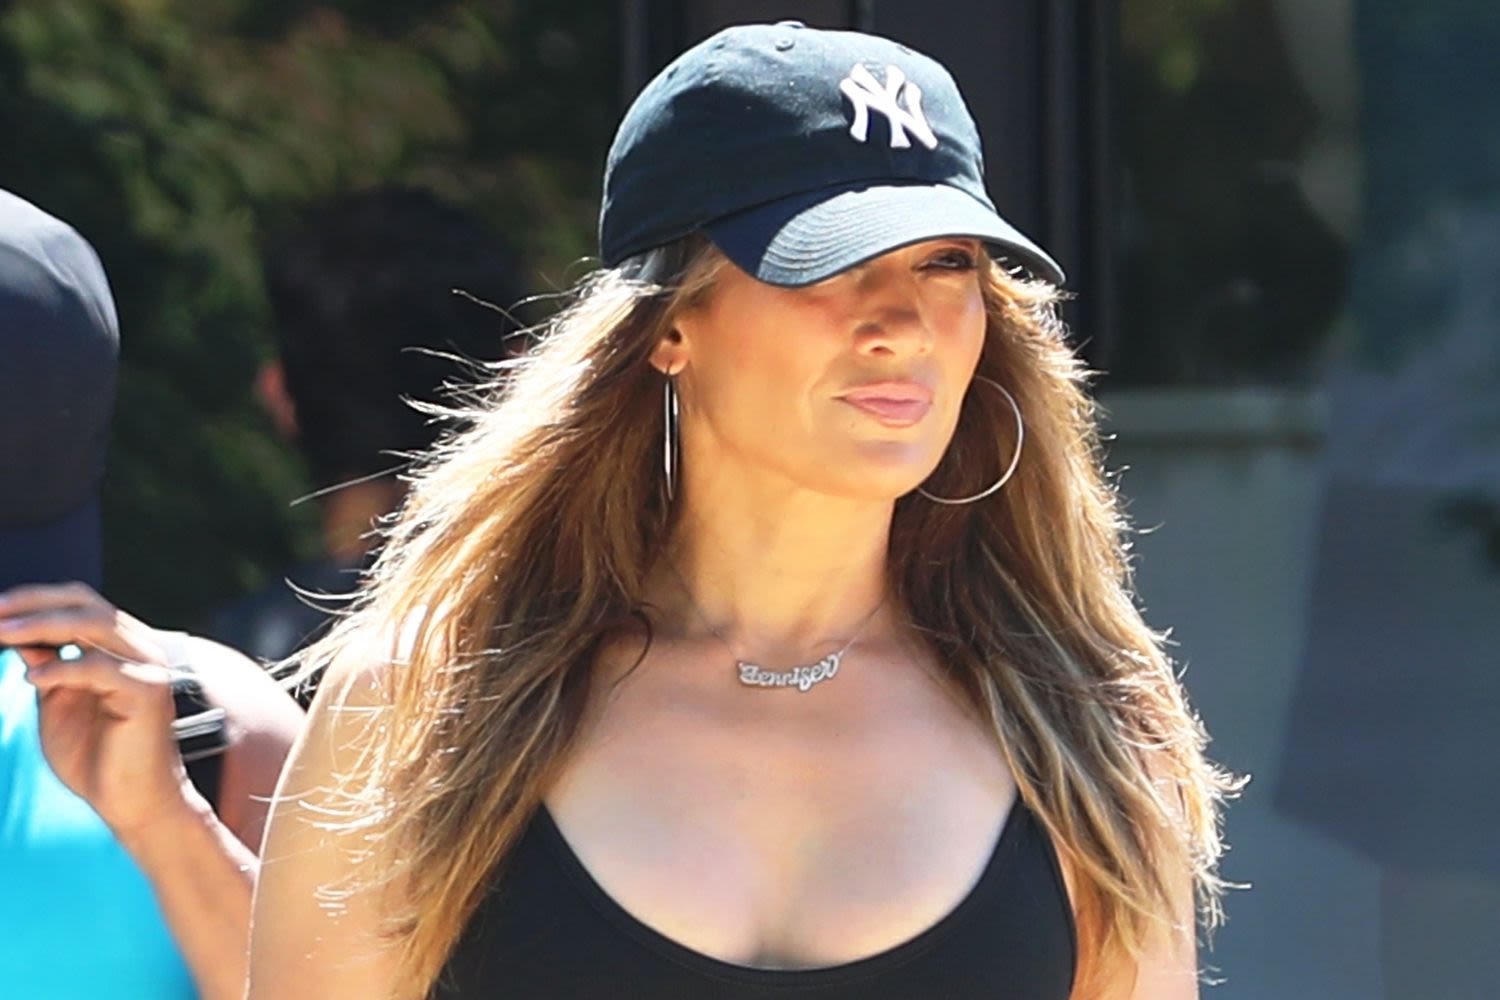 Jennifer Lopez Hits the Gym in Abs-Baring Crop Top and Glitzy Bling — Including a 'Jennifer' Nameplate Necklace